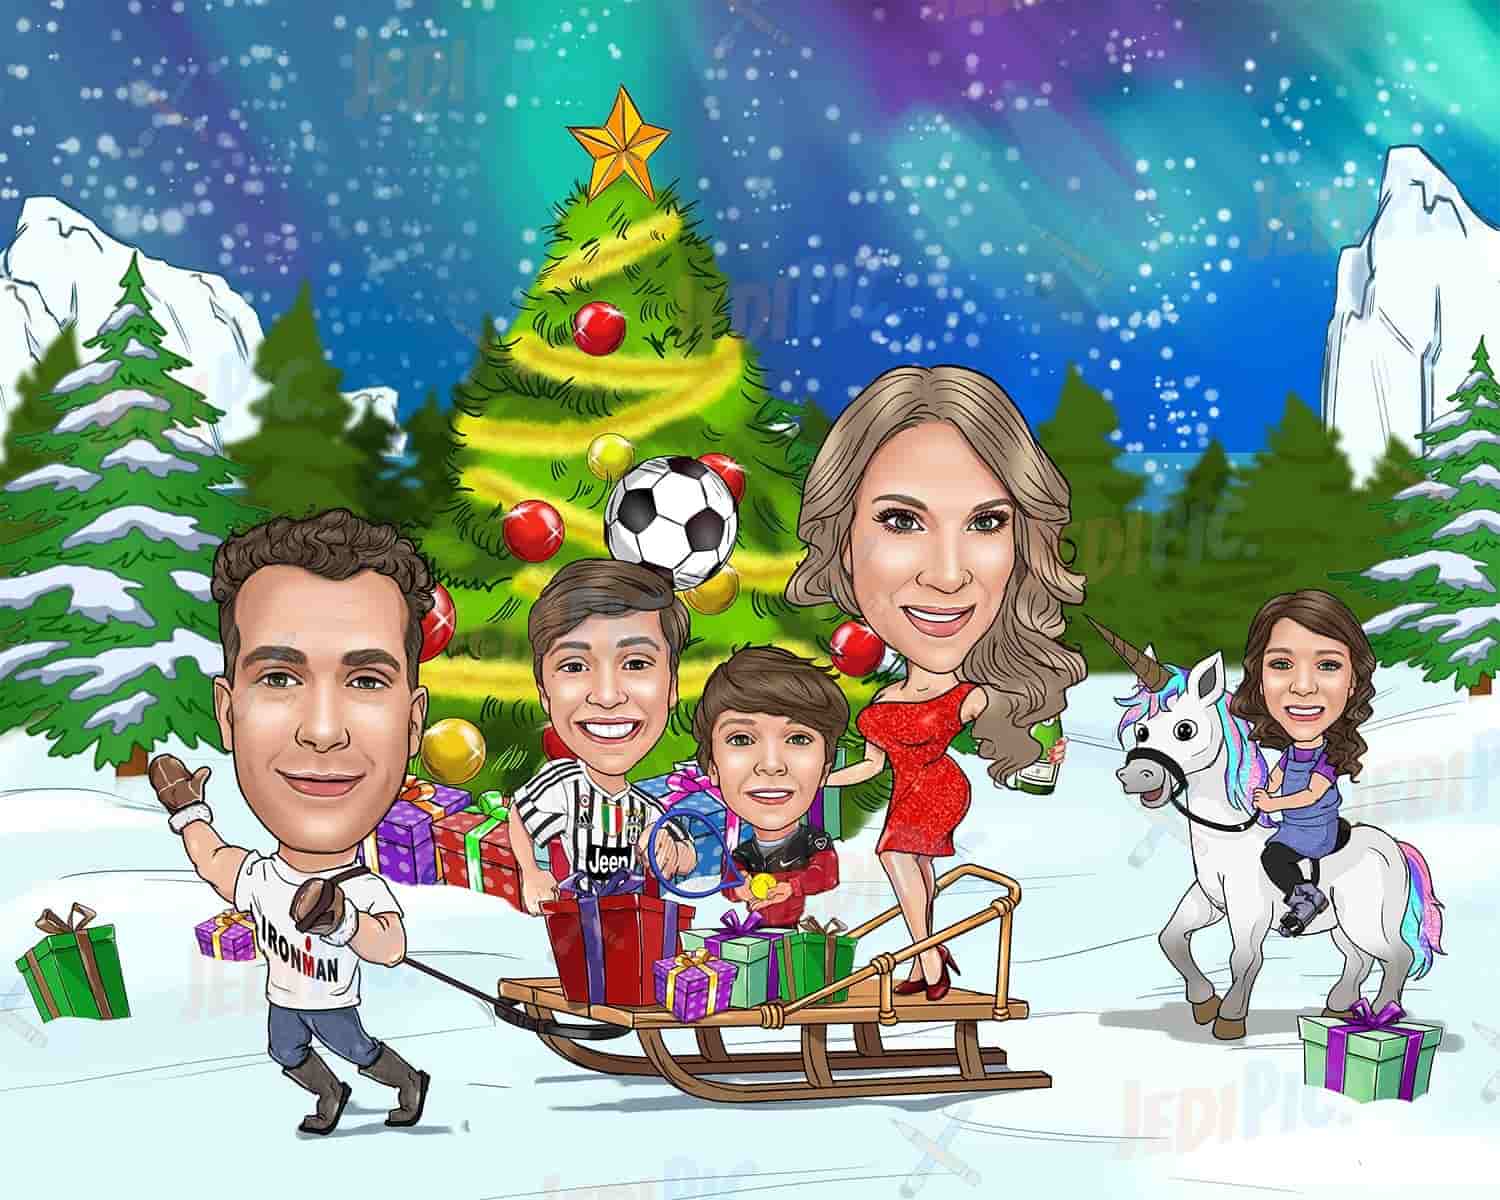 Family Christmas Crads with Snow Background